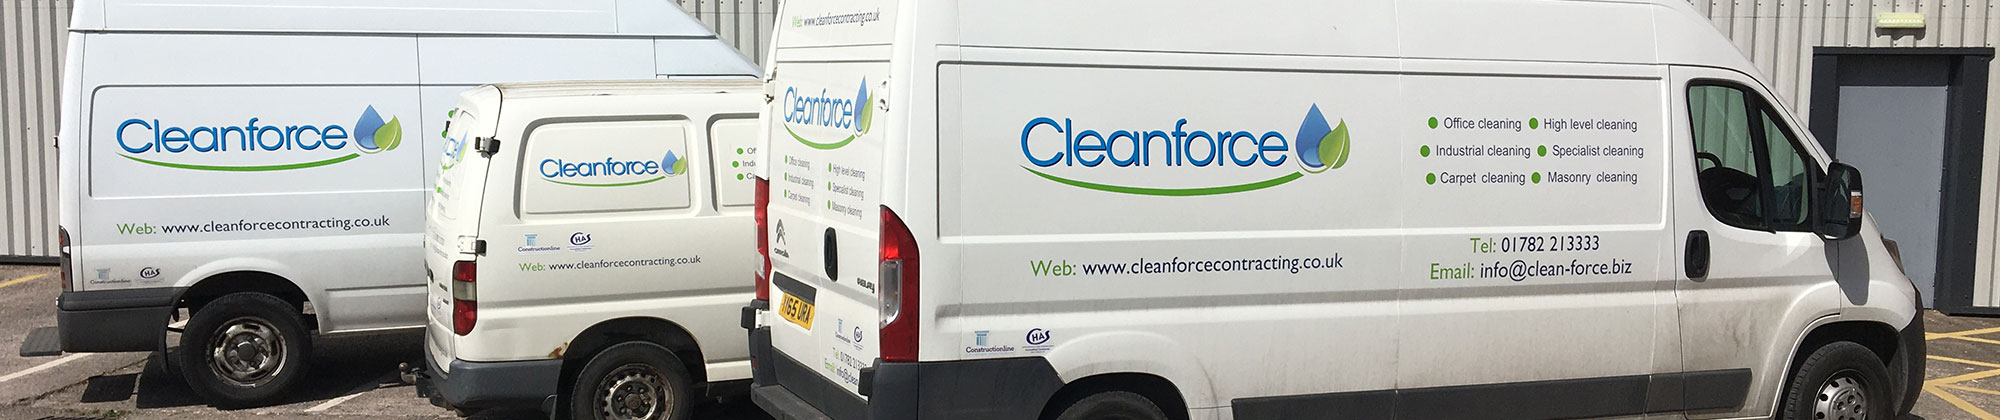 cleanforce contracting